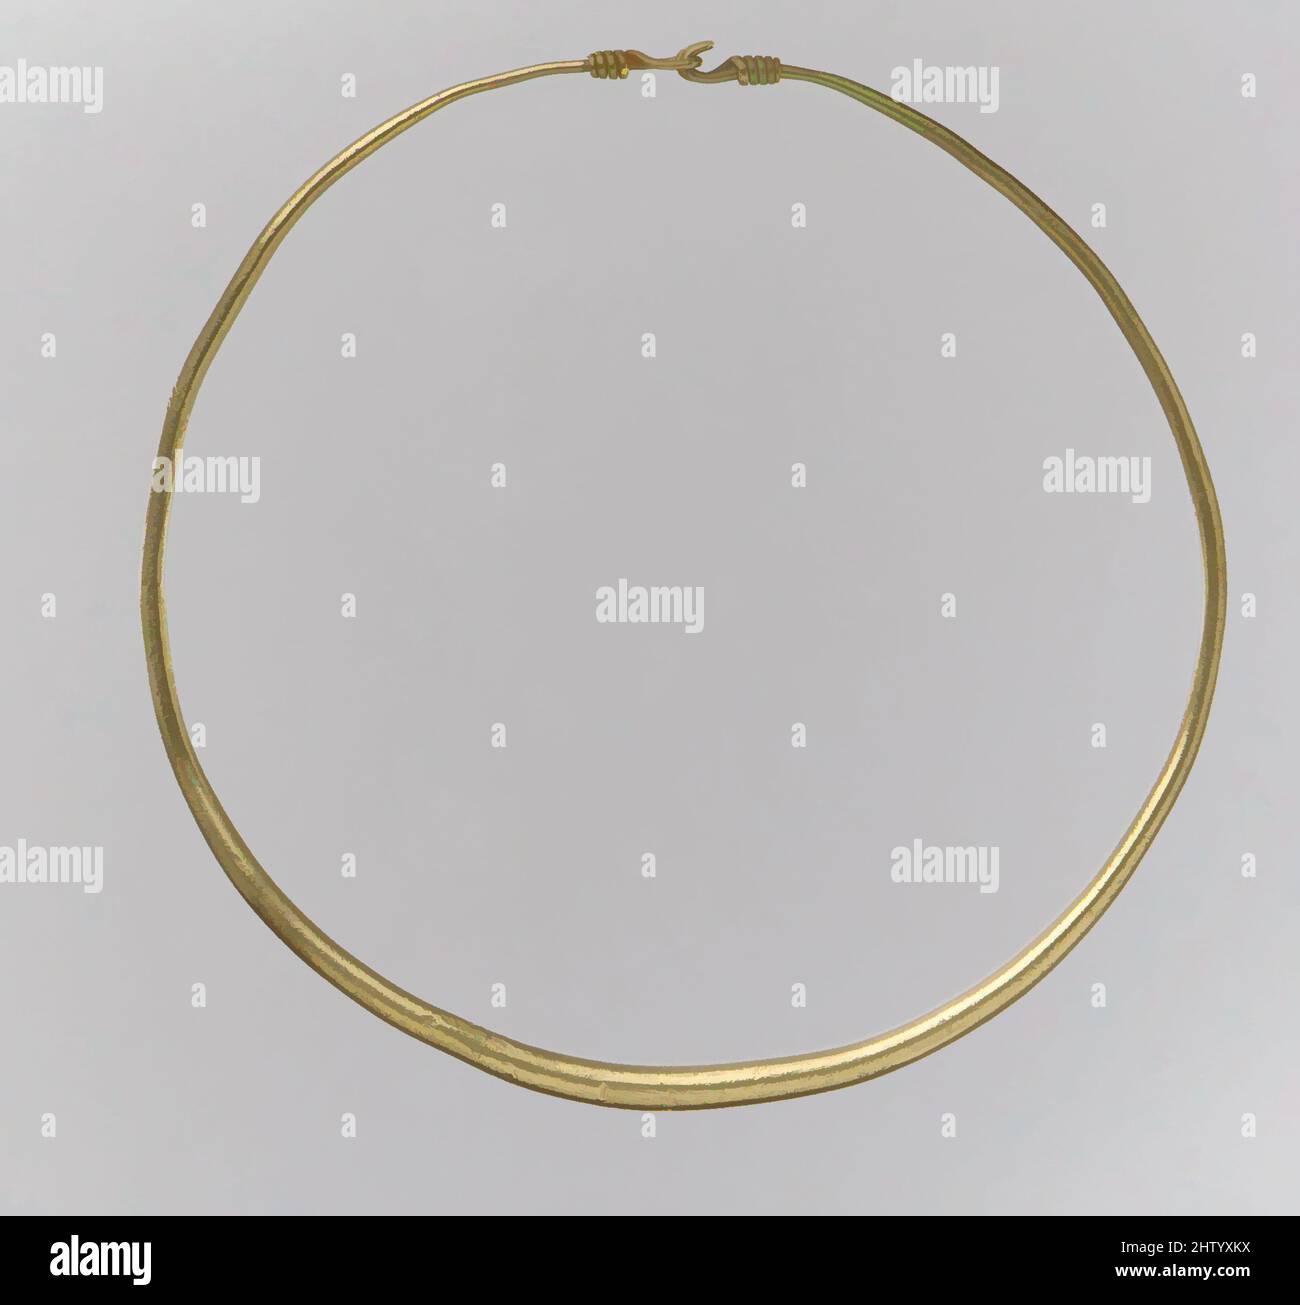 Art inspired by Gold Neck Ring, 5th century, East Germanic, Gold, Overall: 5 13/16 x 1/4 in. (14.7 x 0.6 cm), Metalwork-Gold, Among the Germanic peoples neck rings were worn by both men and women. The considerable weight—101.5 grams—indicates that this piece probably belonged to, Classic works modernized by Artotop with a splash of modernity. Shapes, color and value, eye-catching visual impact on art. Emotions through freedom of artworks in a contemporary way. A timeless message pursuing a wildly creative new direction. Artists turning to the digital medium and creating the Artotop NFT Stock Photo